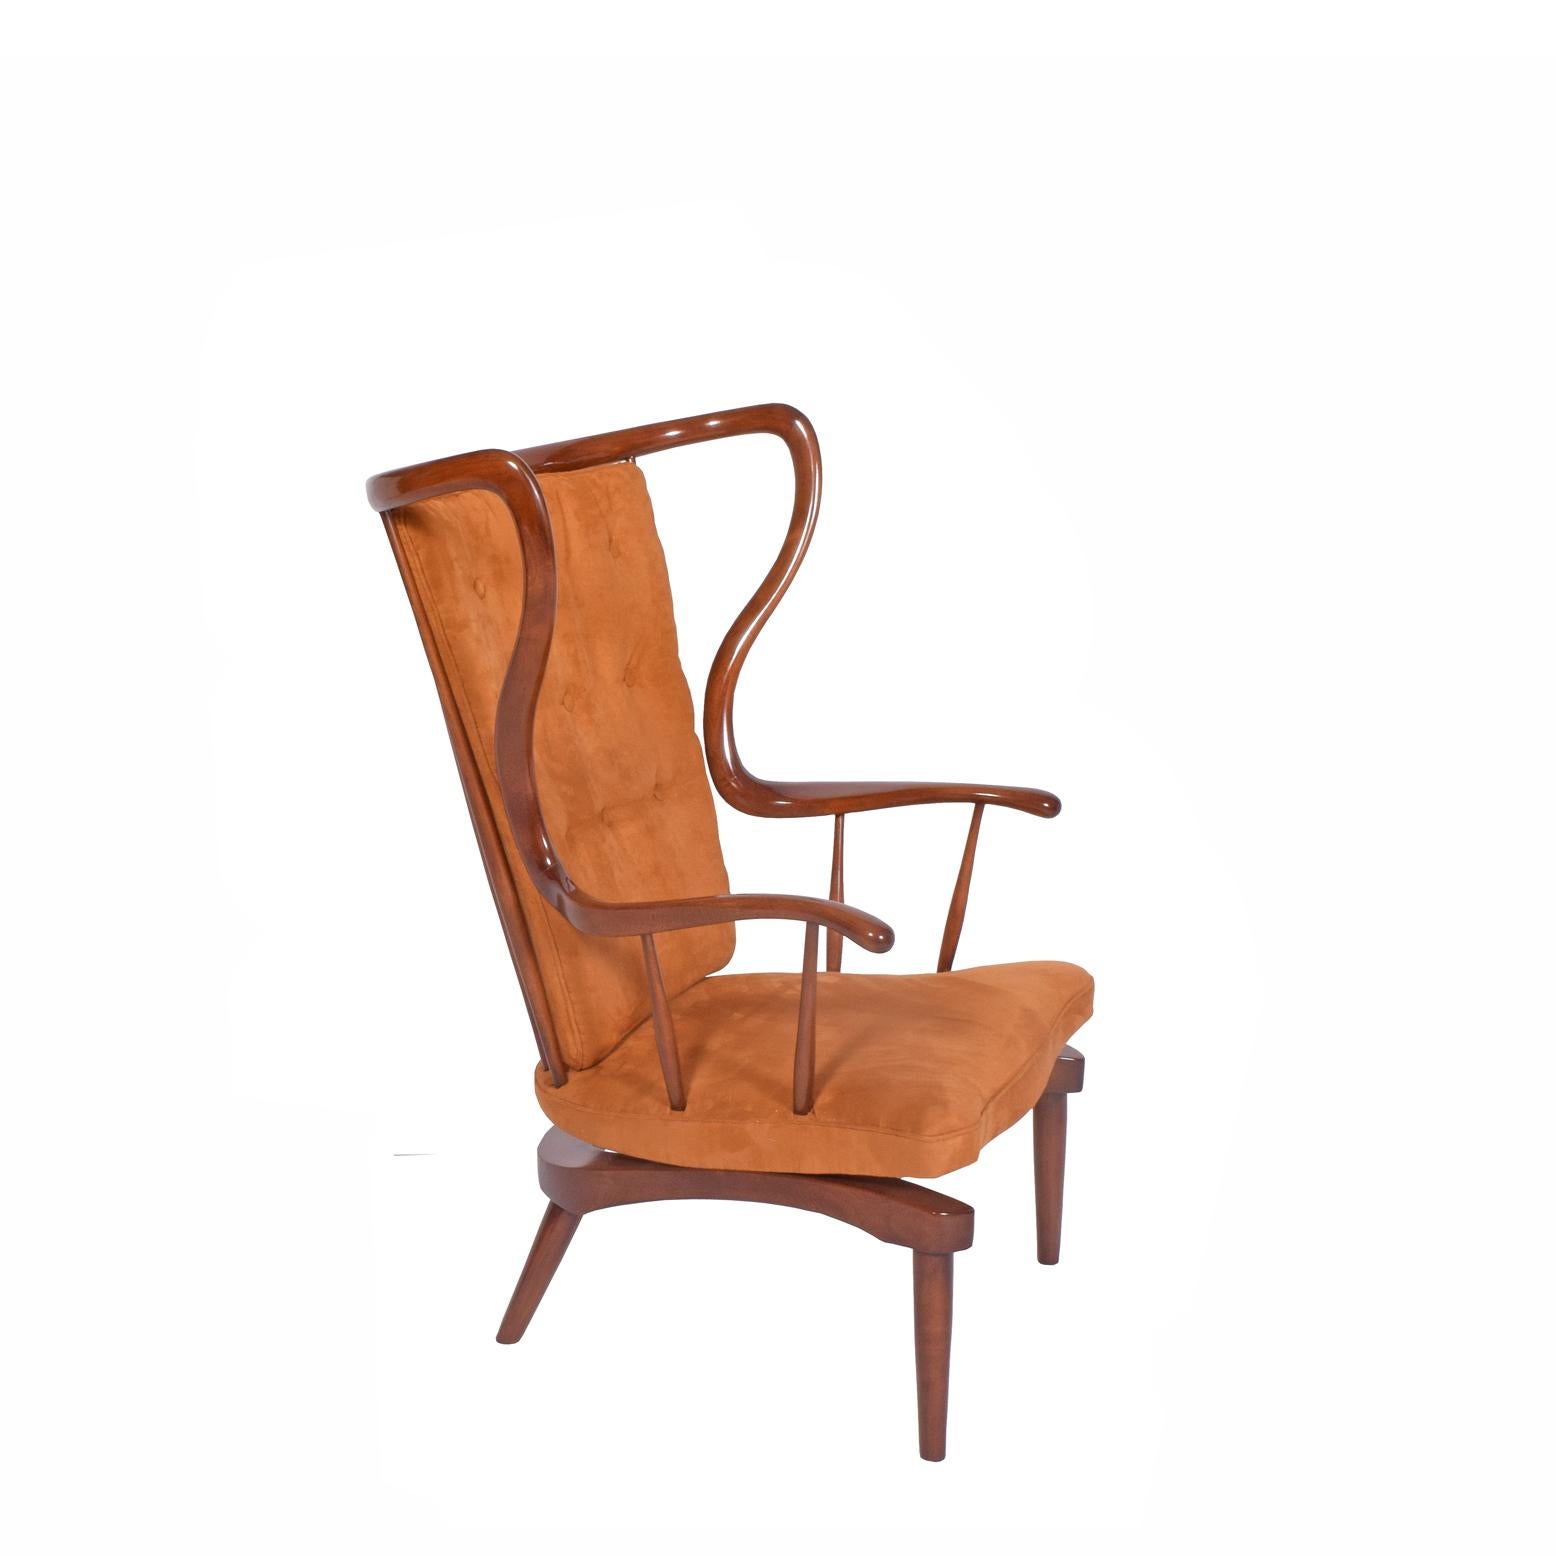 Sculptural, mid-20th century, walnut-stained beechwood Danish rocking chair with slightly elevated seat and two spring rocking mechanisms underneath. Seat and back cushions reuphulstered in faux ultra suede. Loose-back cushion.